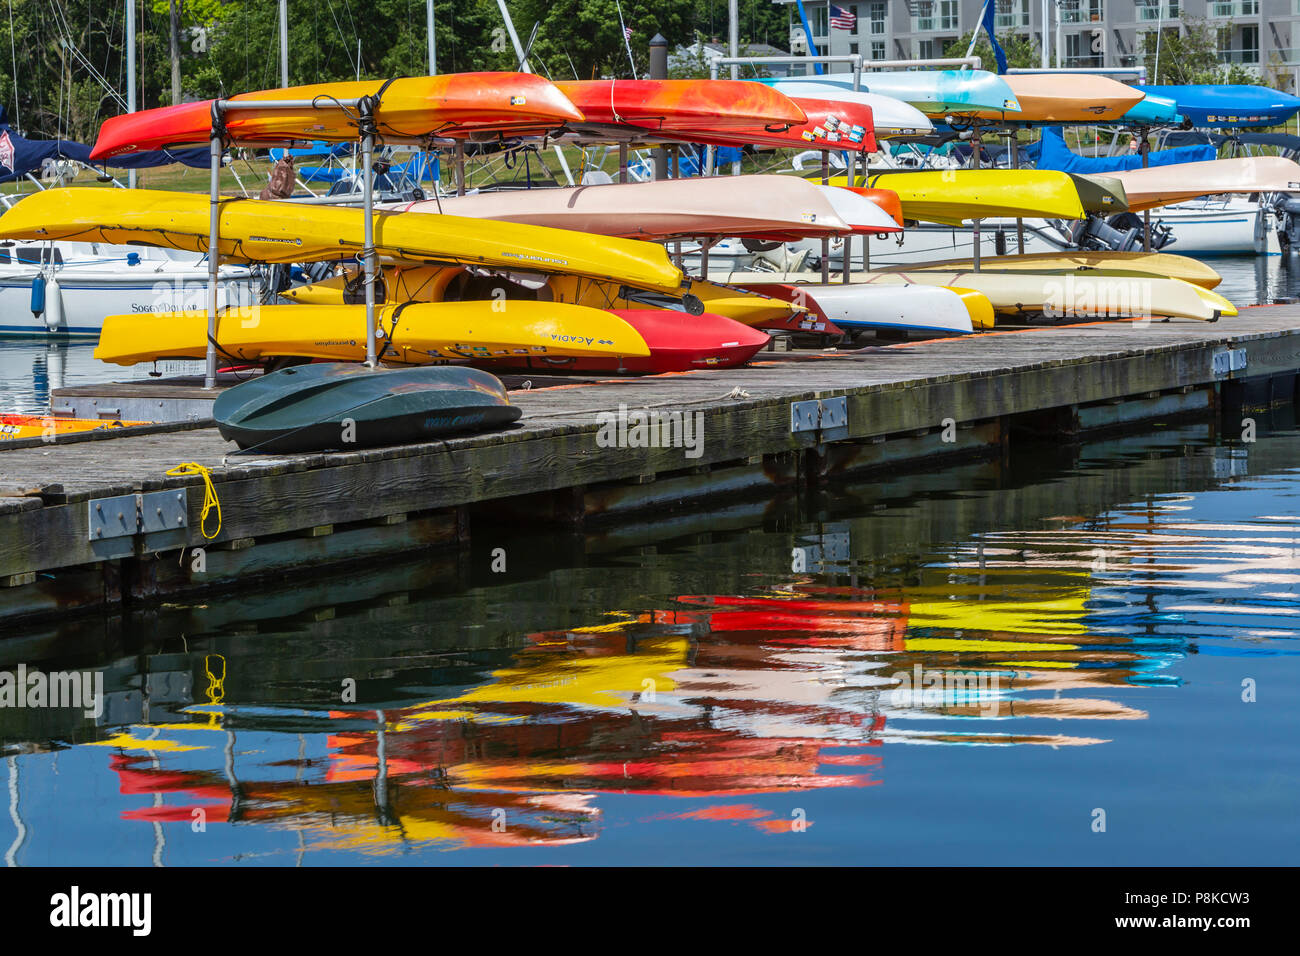 Colorful kayaks on a rack and their reflections in the West Basin of Mamaroneck Harbor in Harbor Island Park, Mamaroneck, New York. Stock Photo